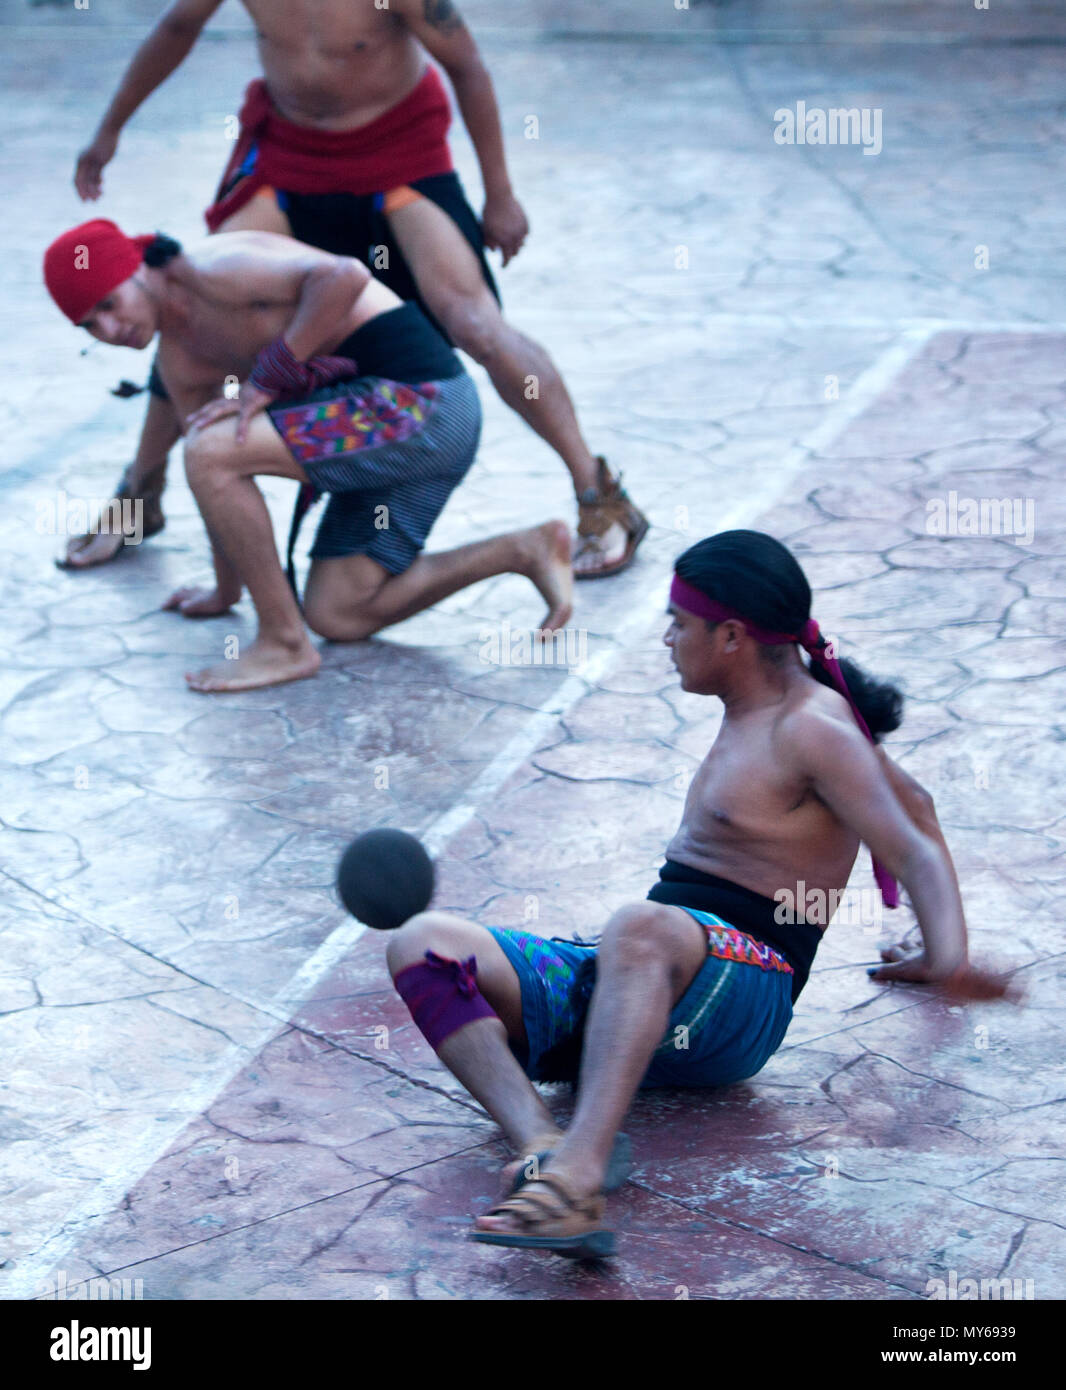 Guatemalan Mayan Ball Player Jose Cristal hits the ball with his hip as his brother Josue Cristal looks at him during the first ¬Pok Ta Pok¬ World Cup Stock Photo